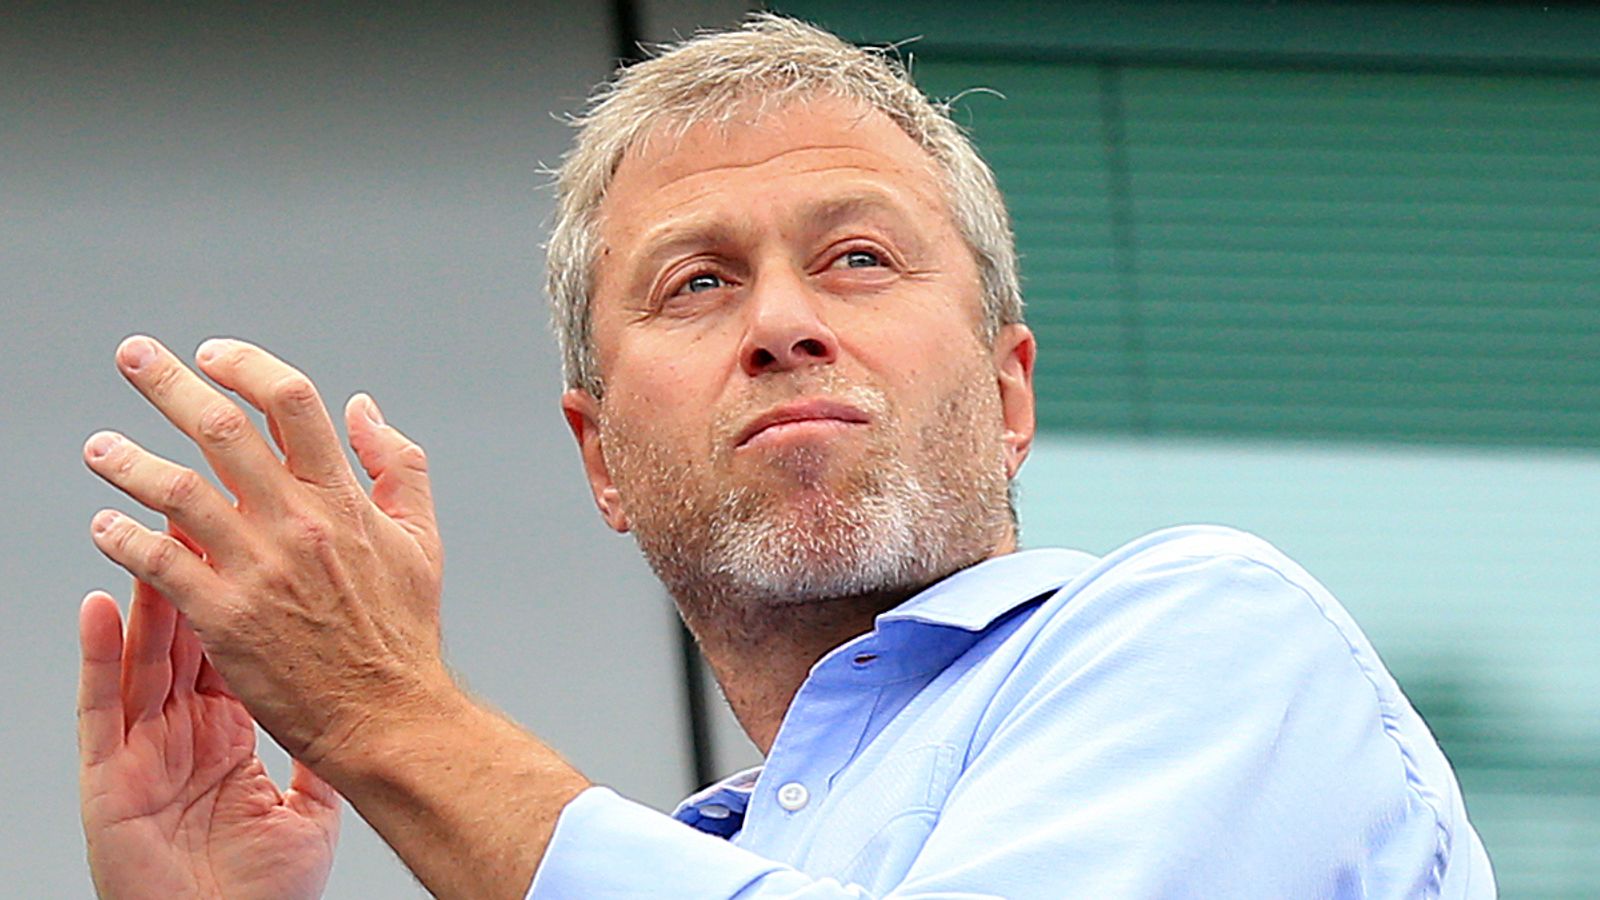 Chelsea owner Roman Abramovich: I have decided to sell the club